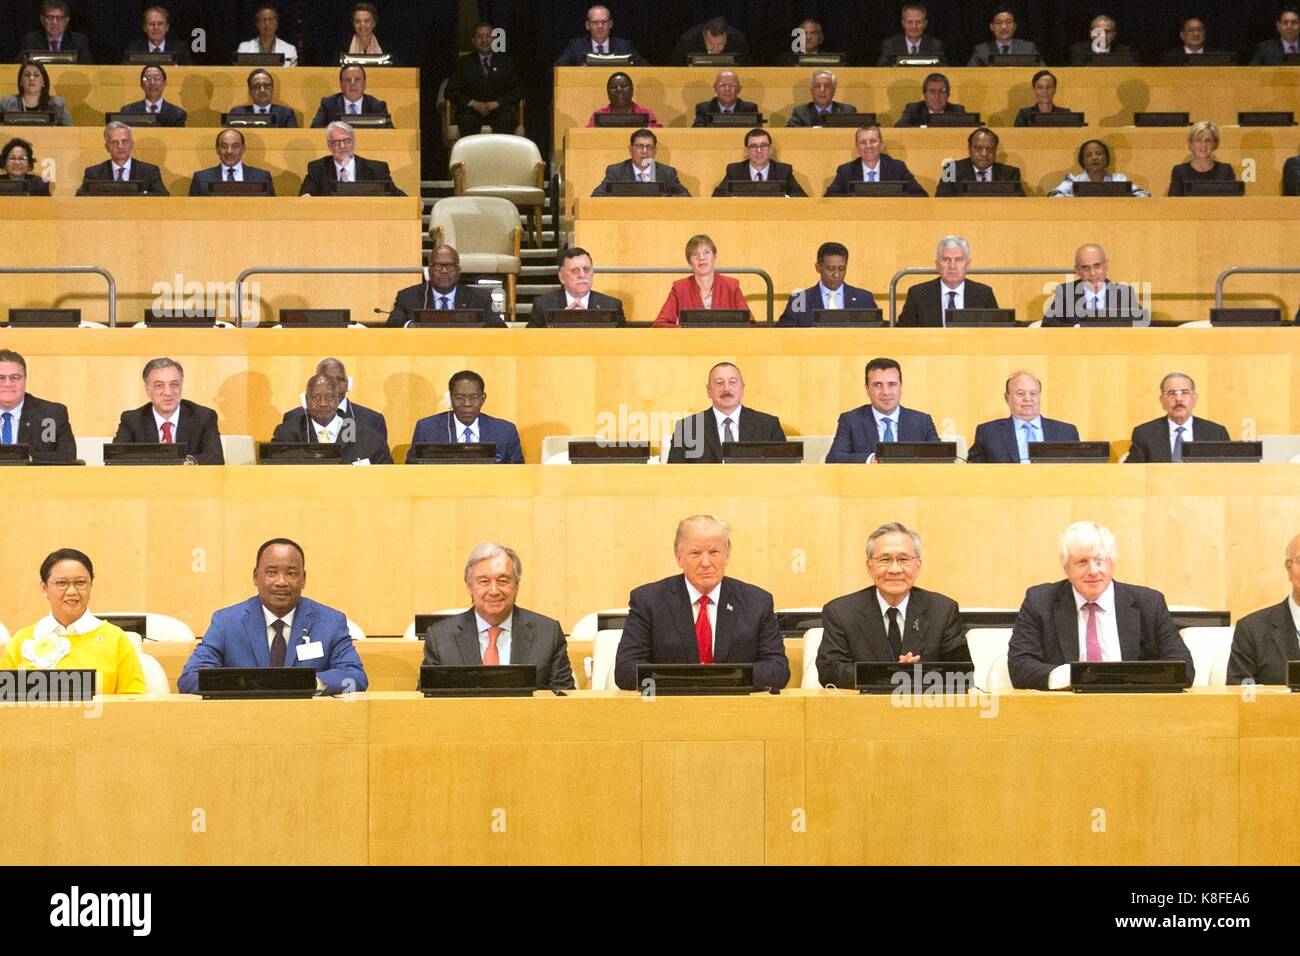 U.S. President Donald Trump, center, sits with world leaders for a group photo at the 'Reforming the United Nations: Management, Security, and Development' meeting during the 72nd Session of the United Nations General Assembly September 18, 2017 in New York City. United Nations Secretary General Antonio Guterres is to the presidents left. Stock Photo